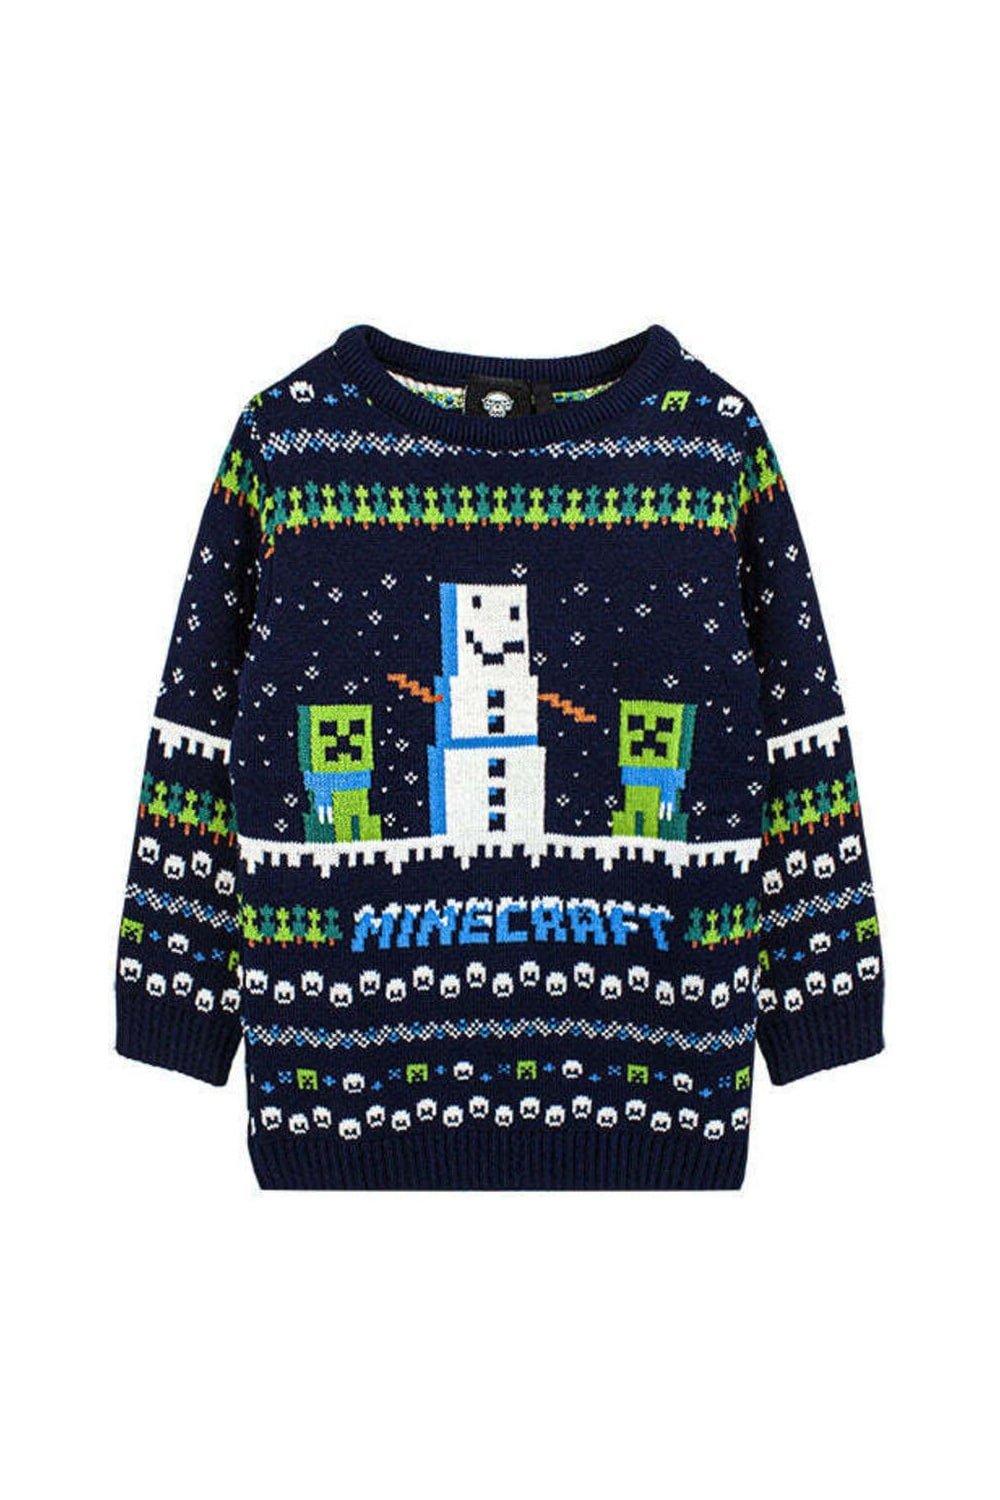 Snowy Knitted Christmas Jumper